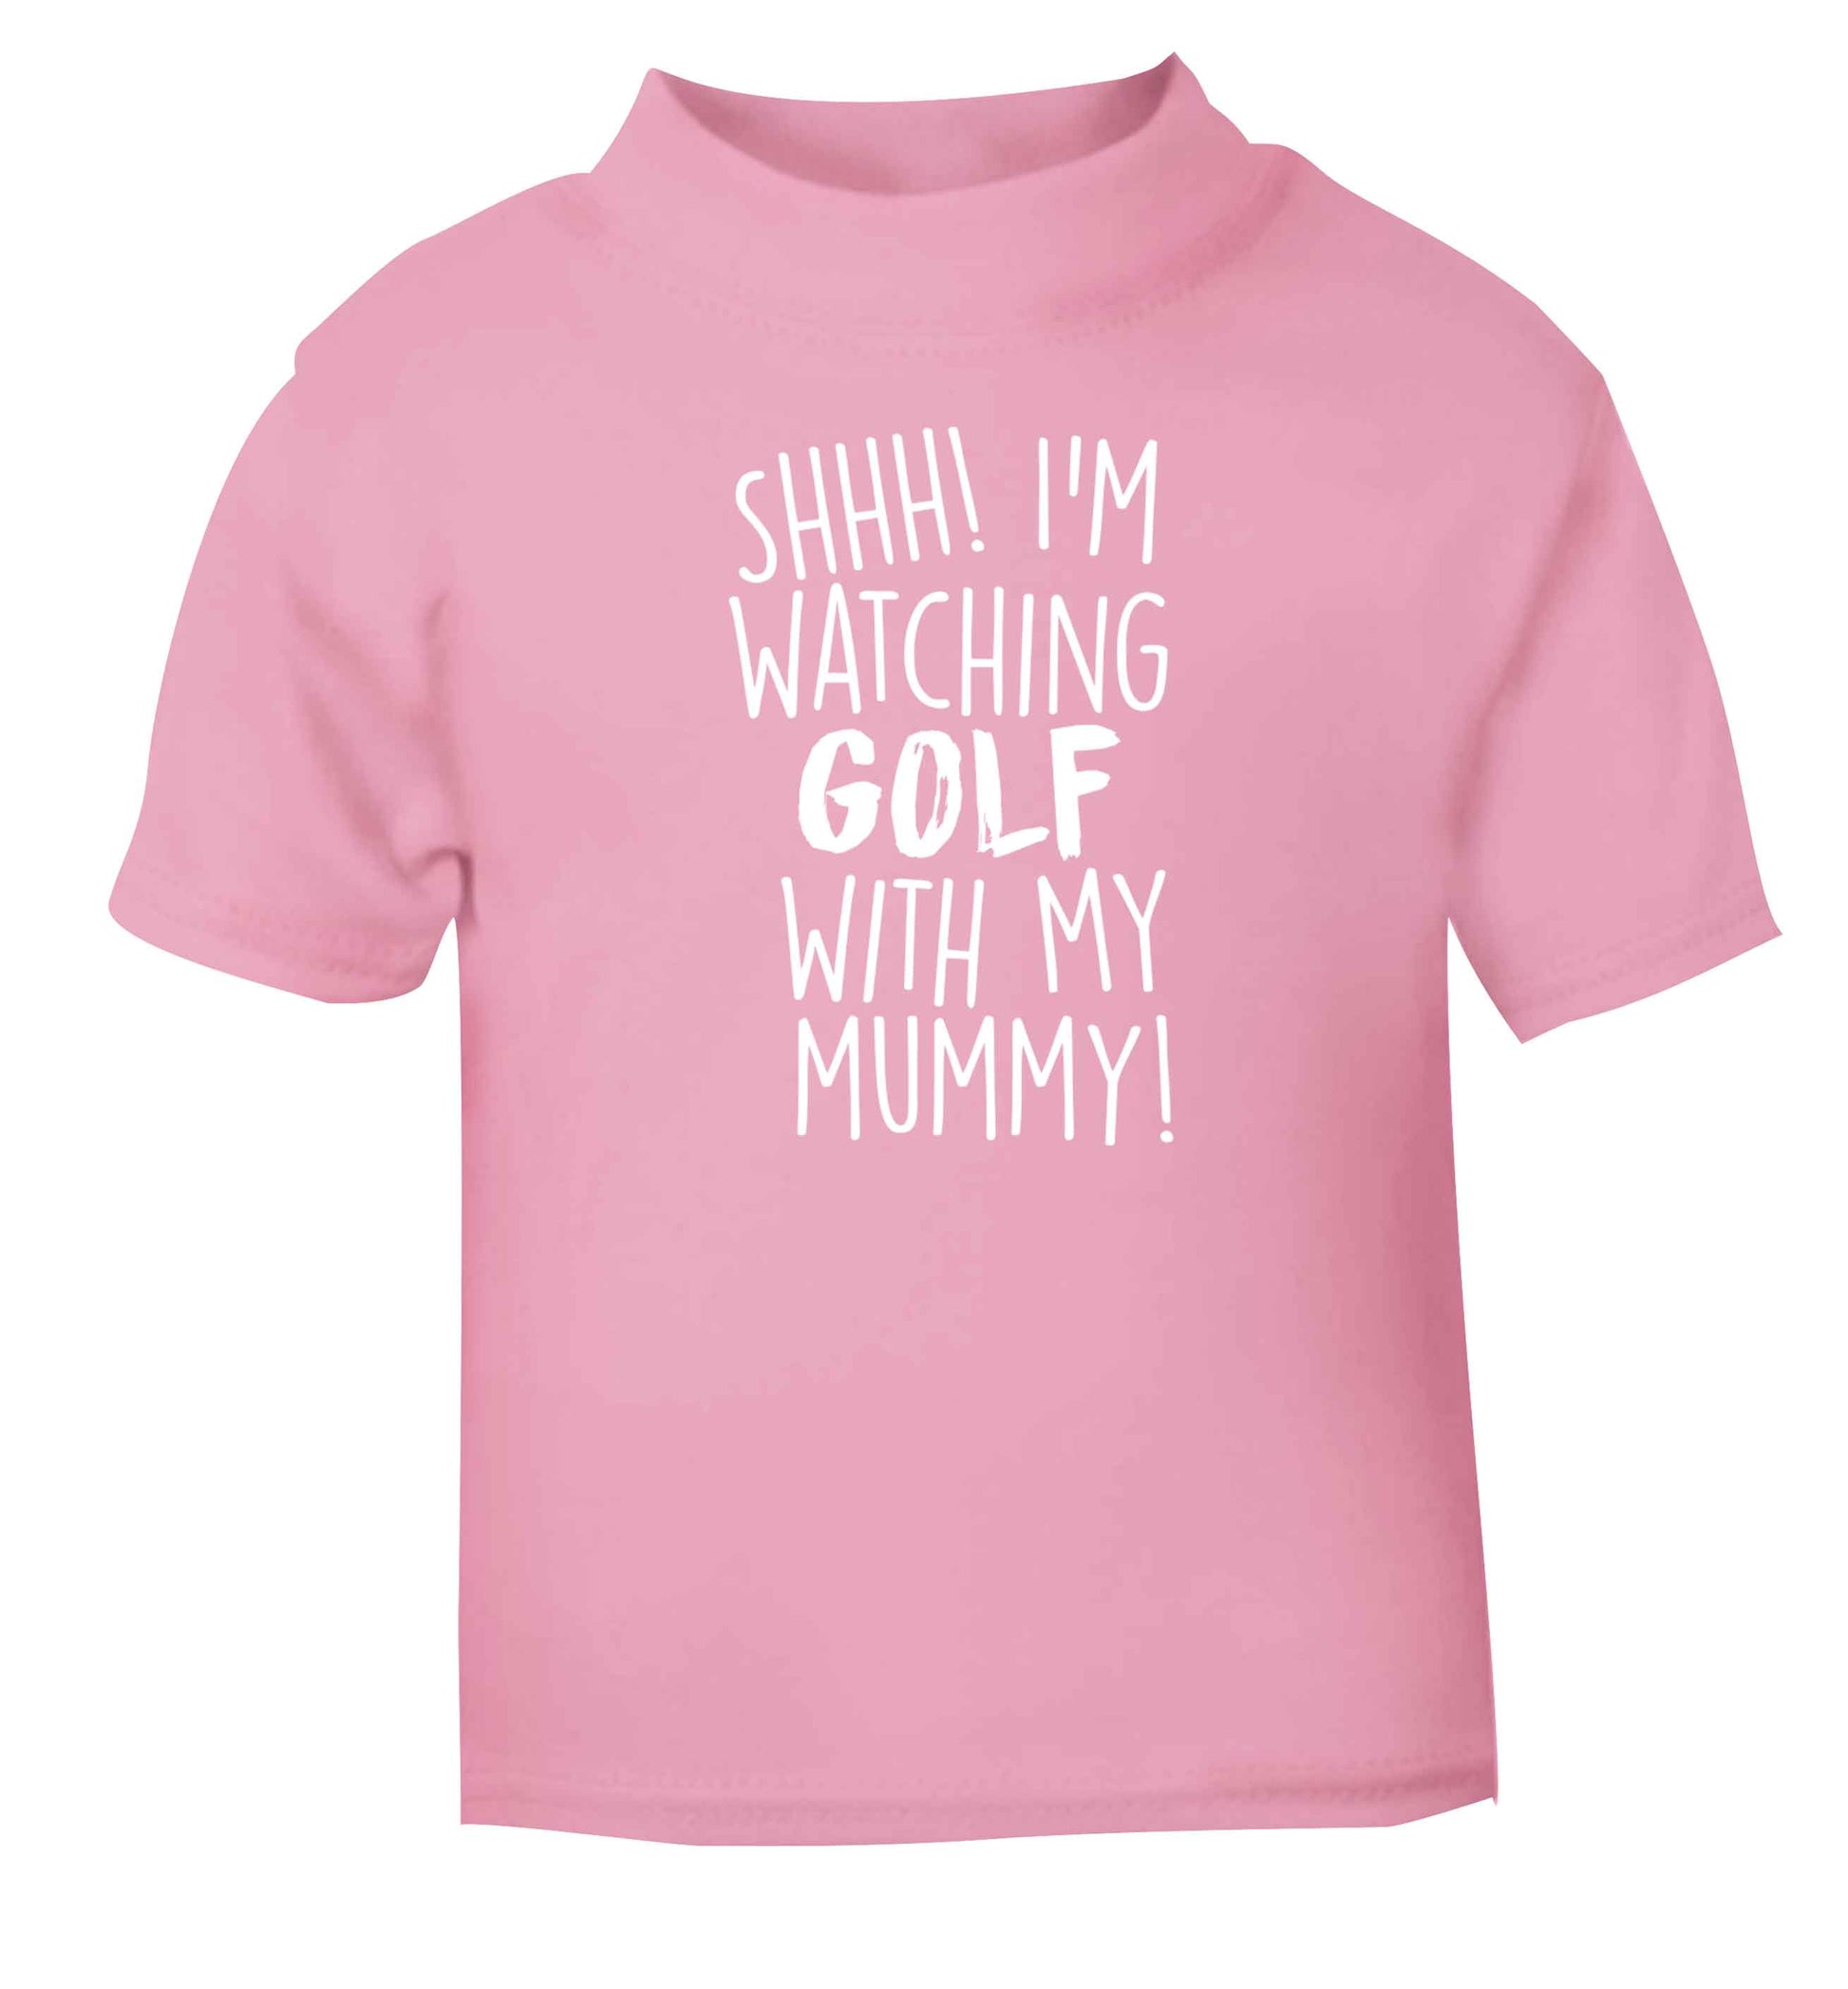 Shh I'm watching golf with my mummy light pink Baby Toddler Tshirt 2 Years